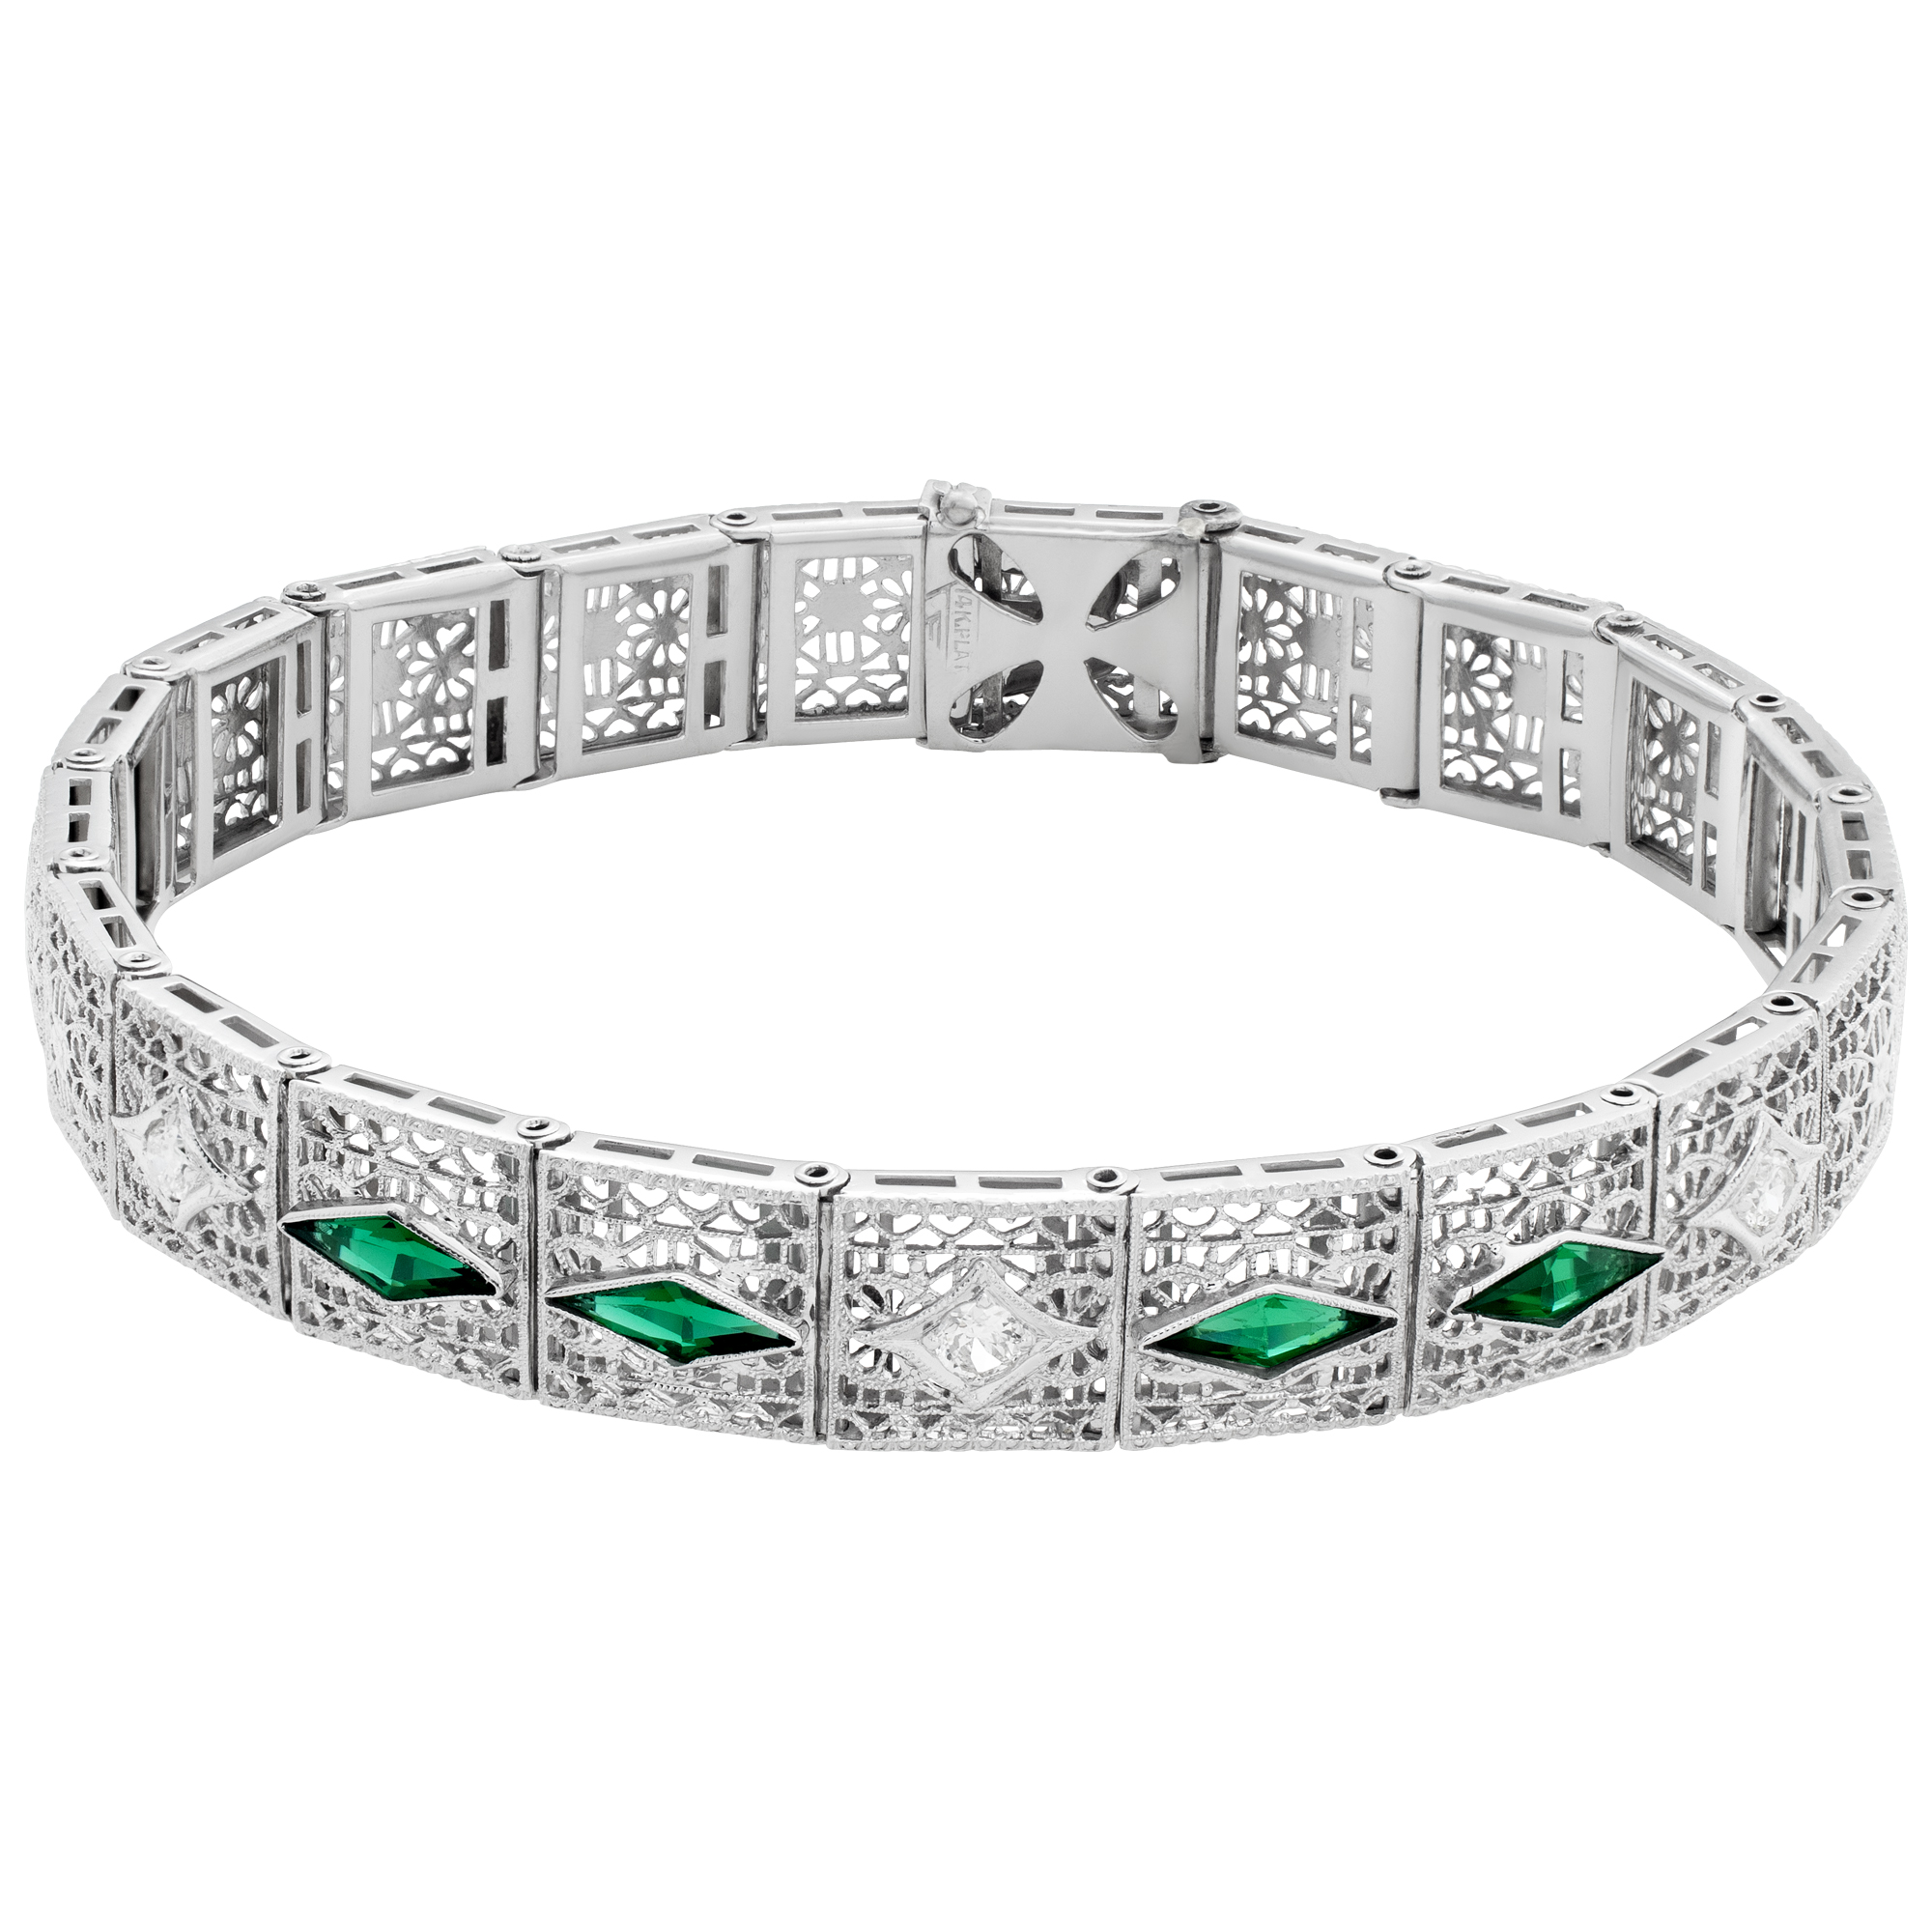 Edwardian filigree line bracelet with diamonds and synthetic emeralds set in 14k white gold, with platinum top.